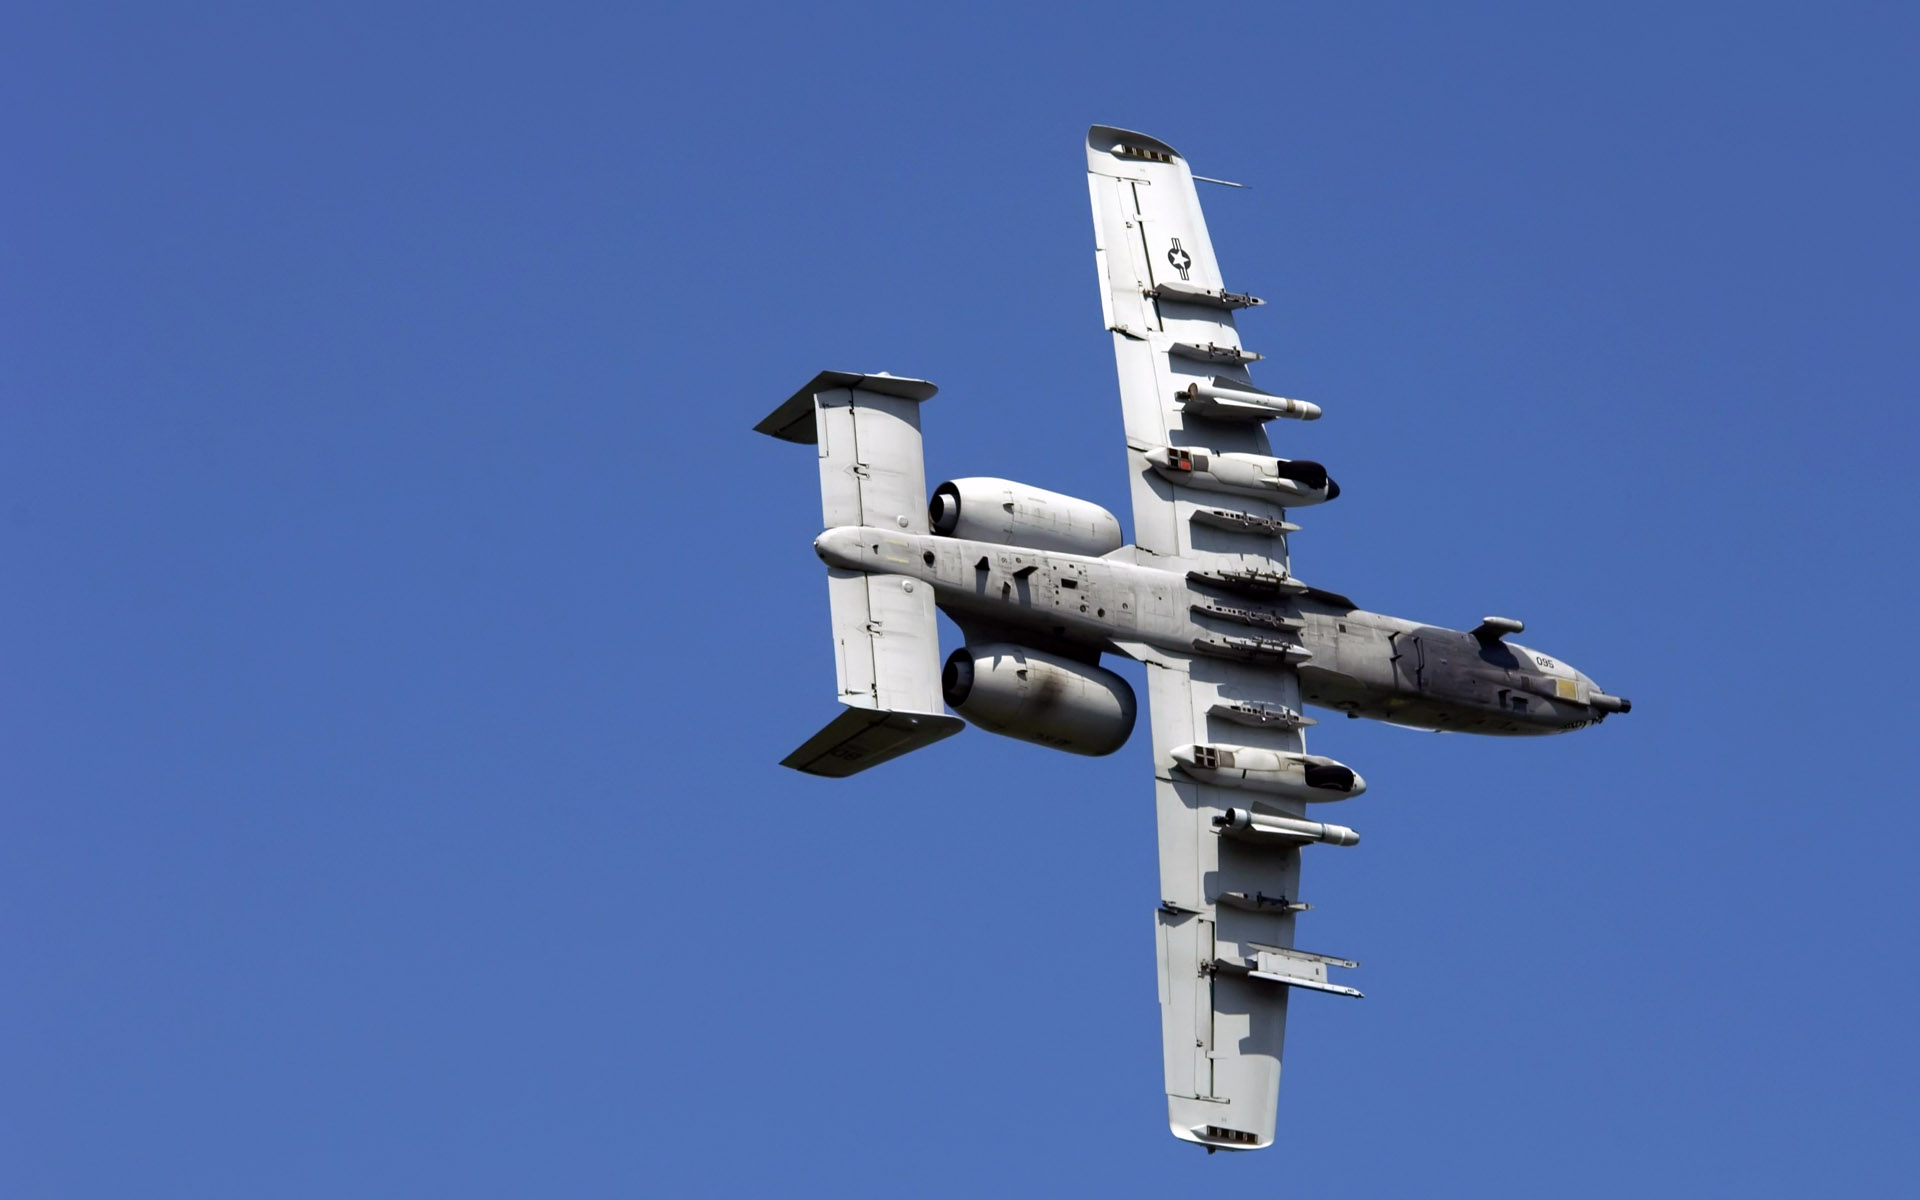 A 10 Thunderbolt Approaching Target9527711443 - A 10 Thunderbolt Approaching Target - Thunderbolt, Target, Approaching, Airforce